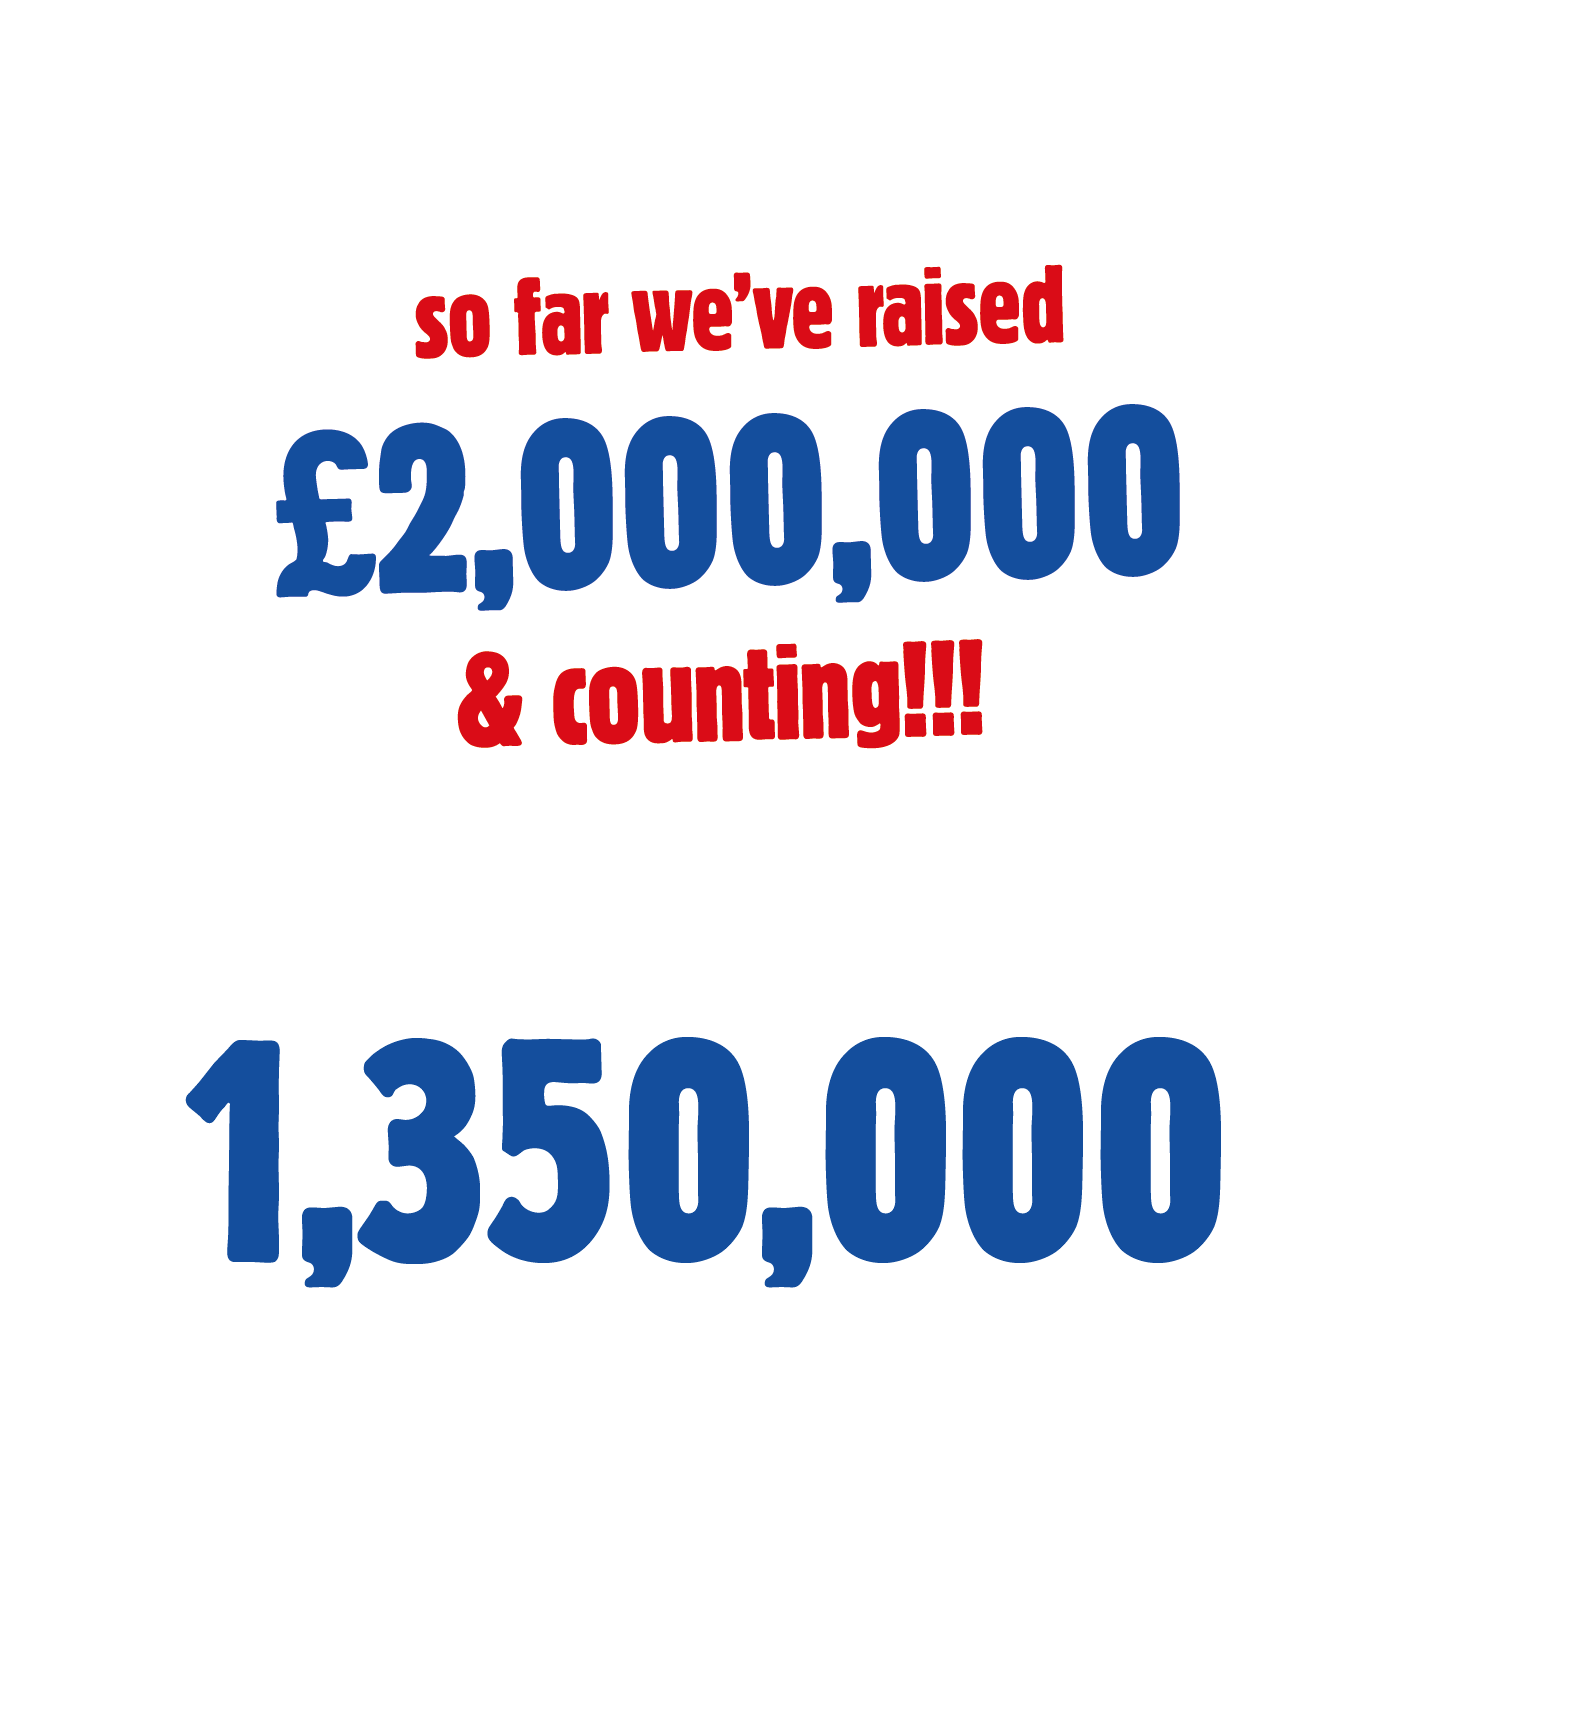 so far we've raised £2,000,000 & counting!!! 1,350,000 people